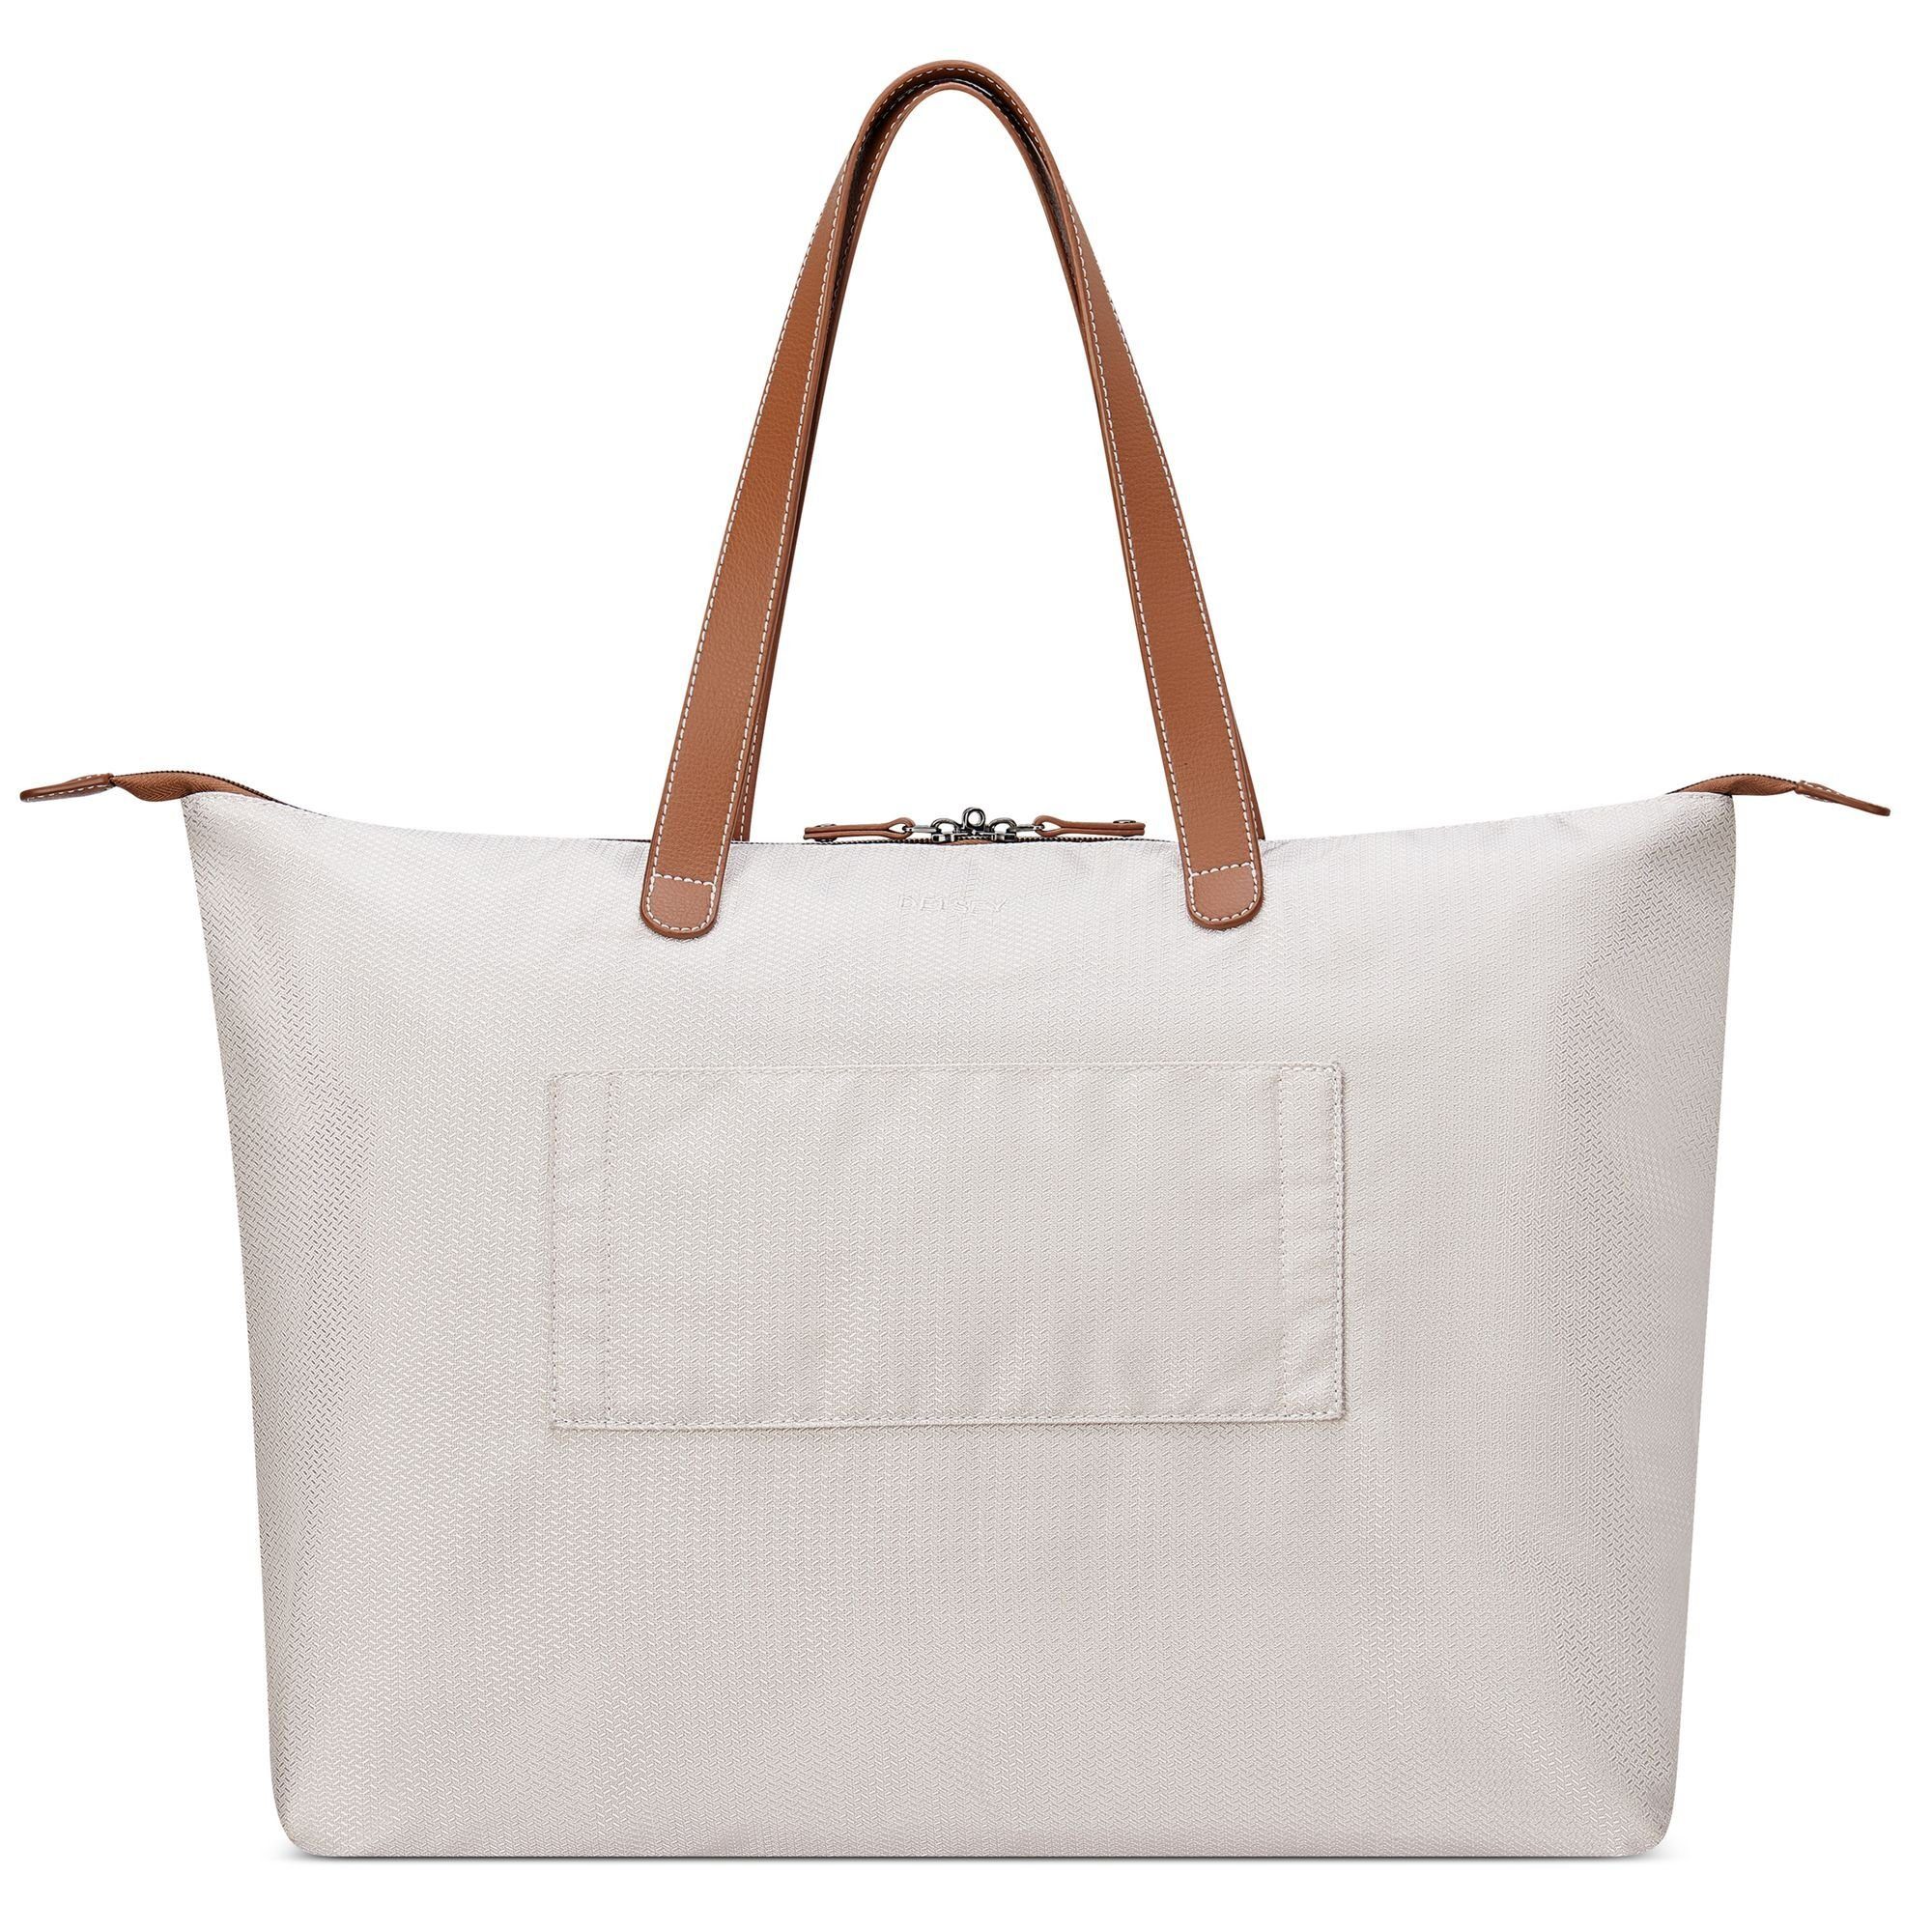 Air angora Chatelet Delsey Weekender Polyester 2.0,